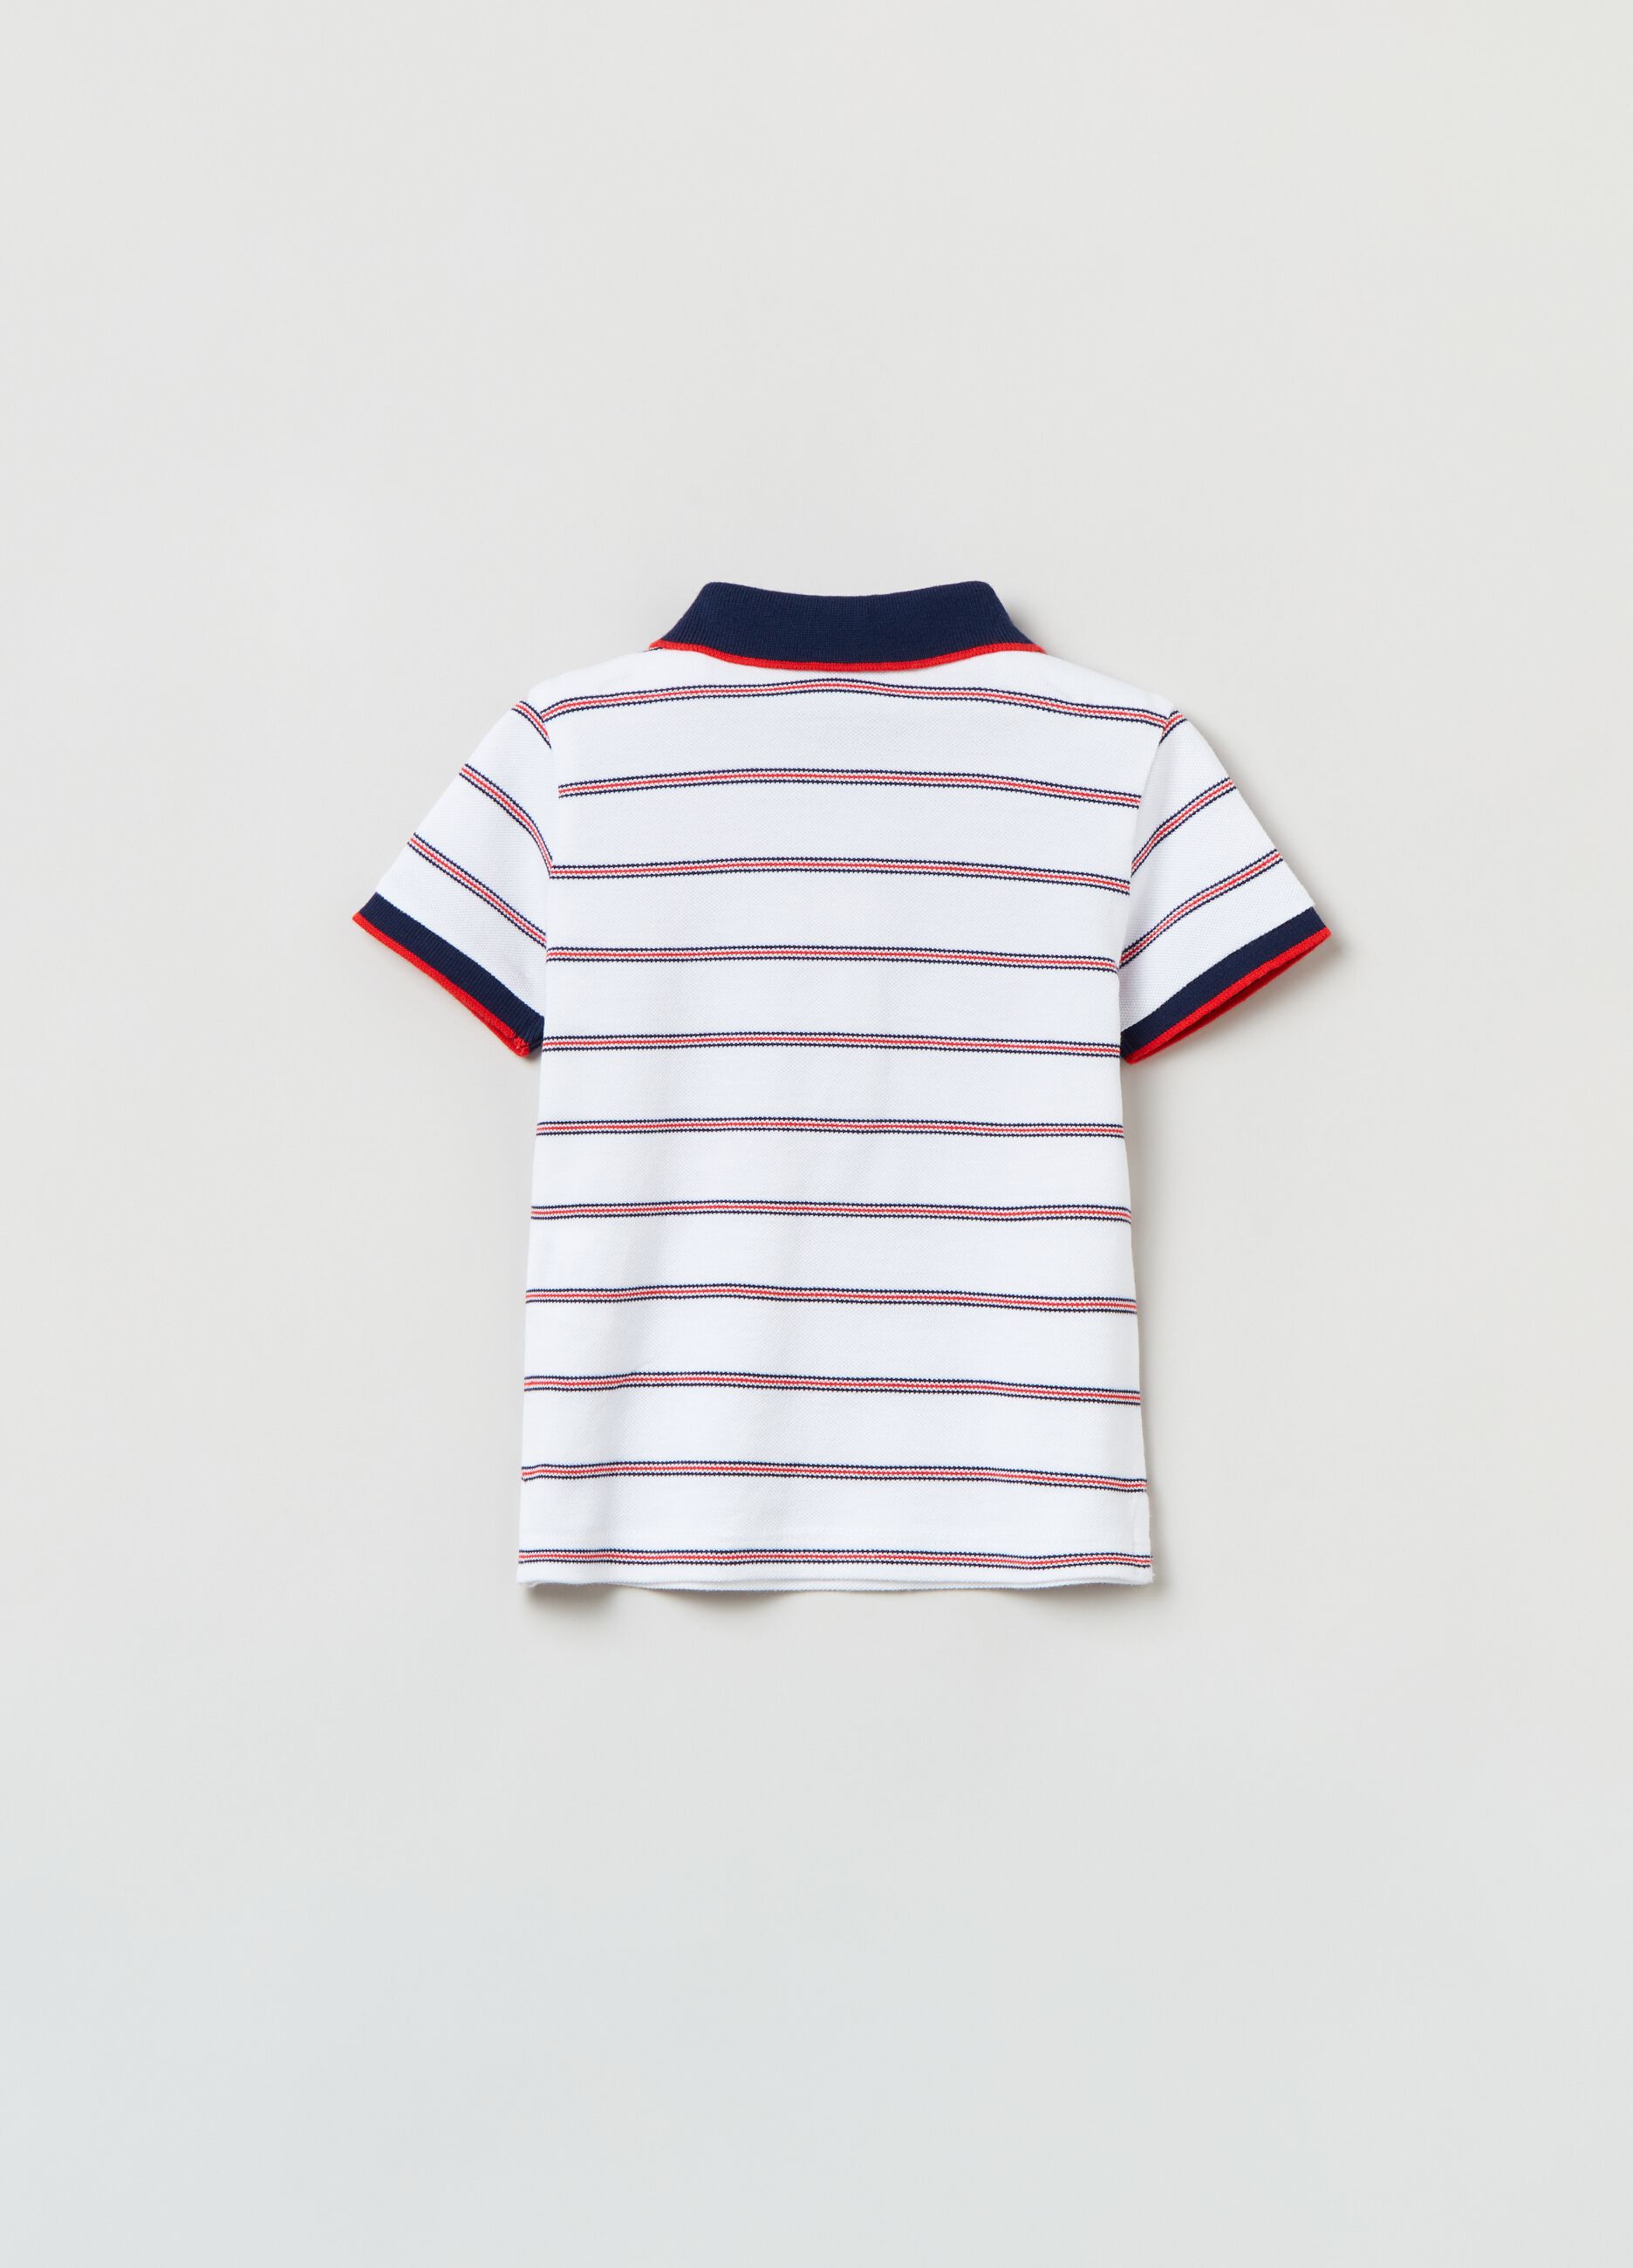 Polo shirt in cotton with stripes print.